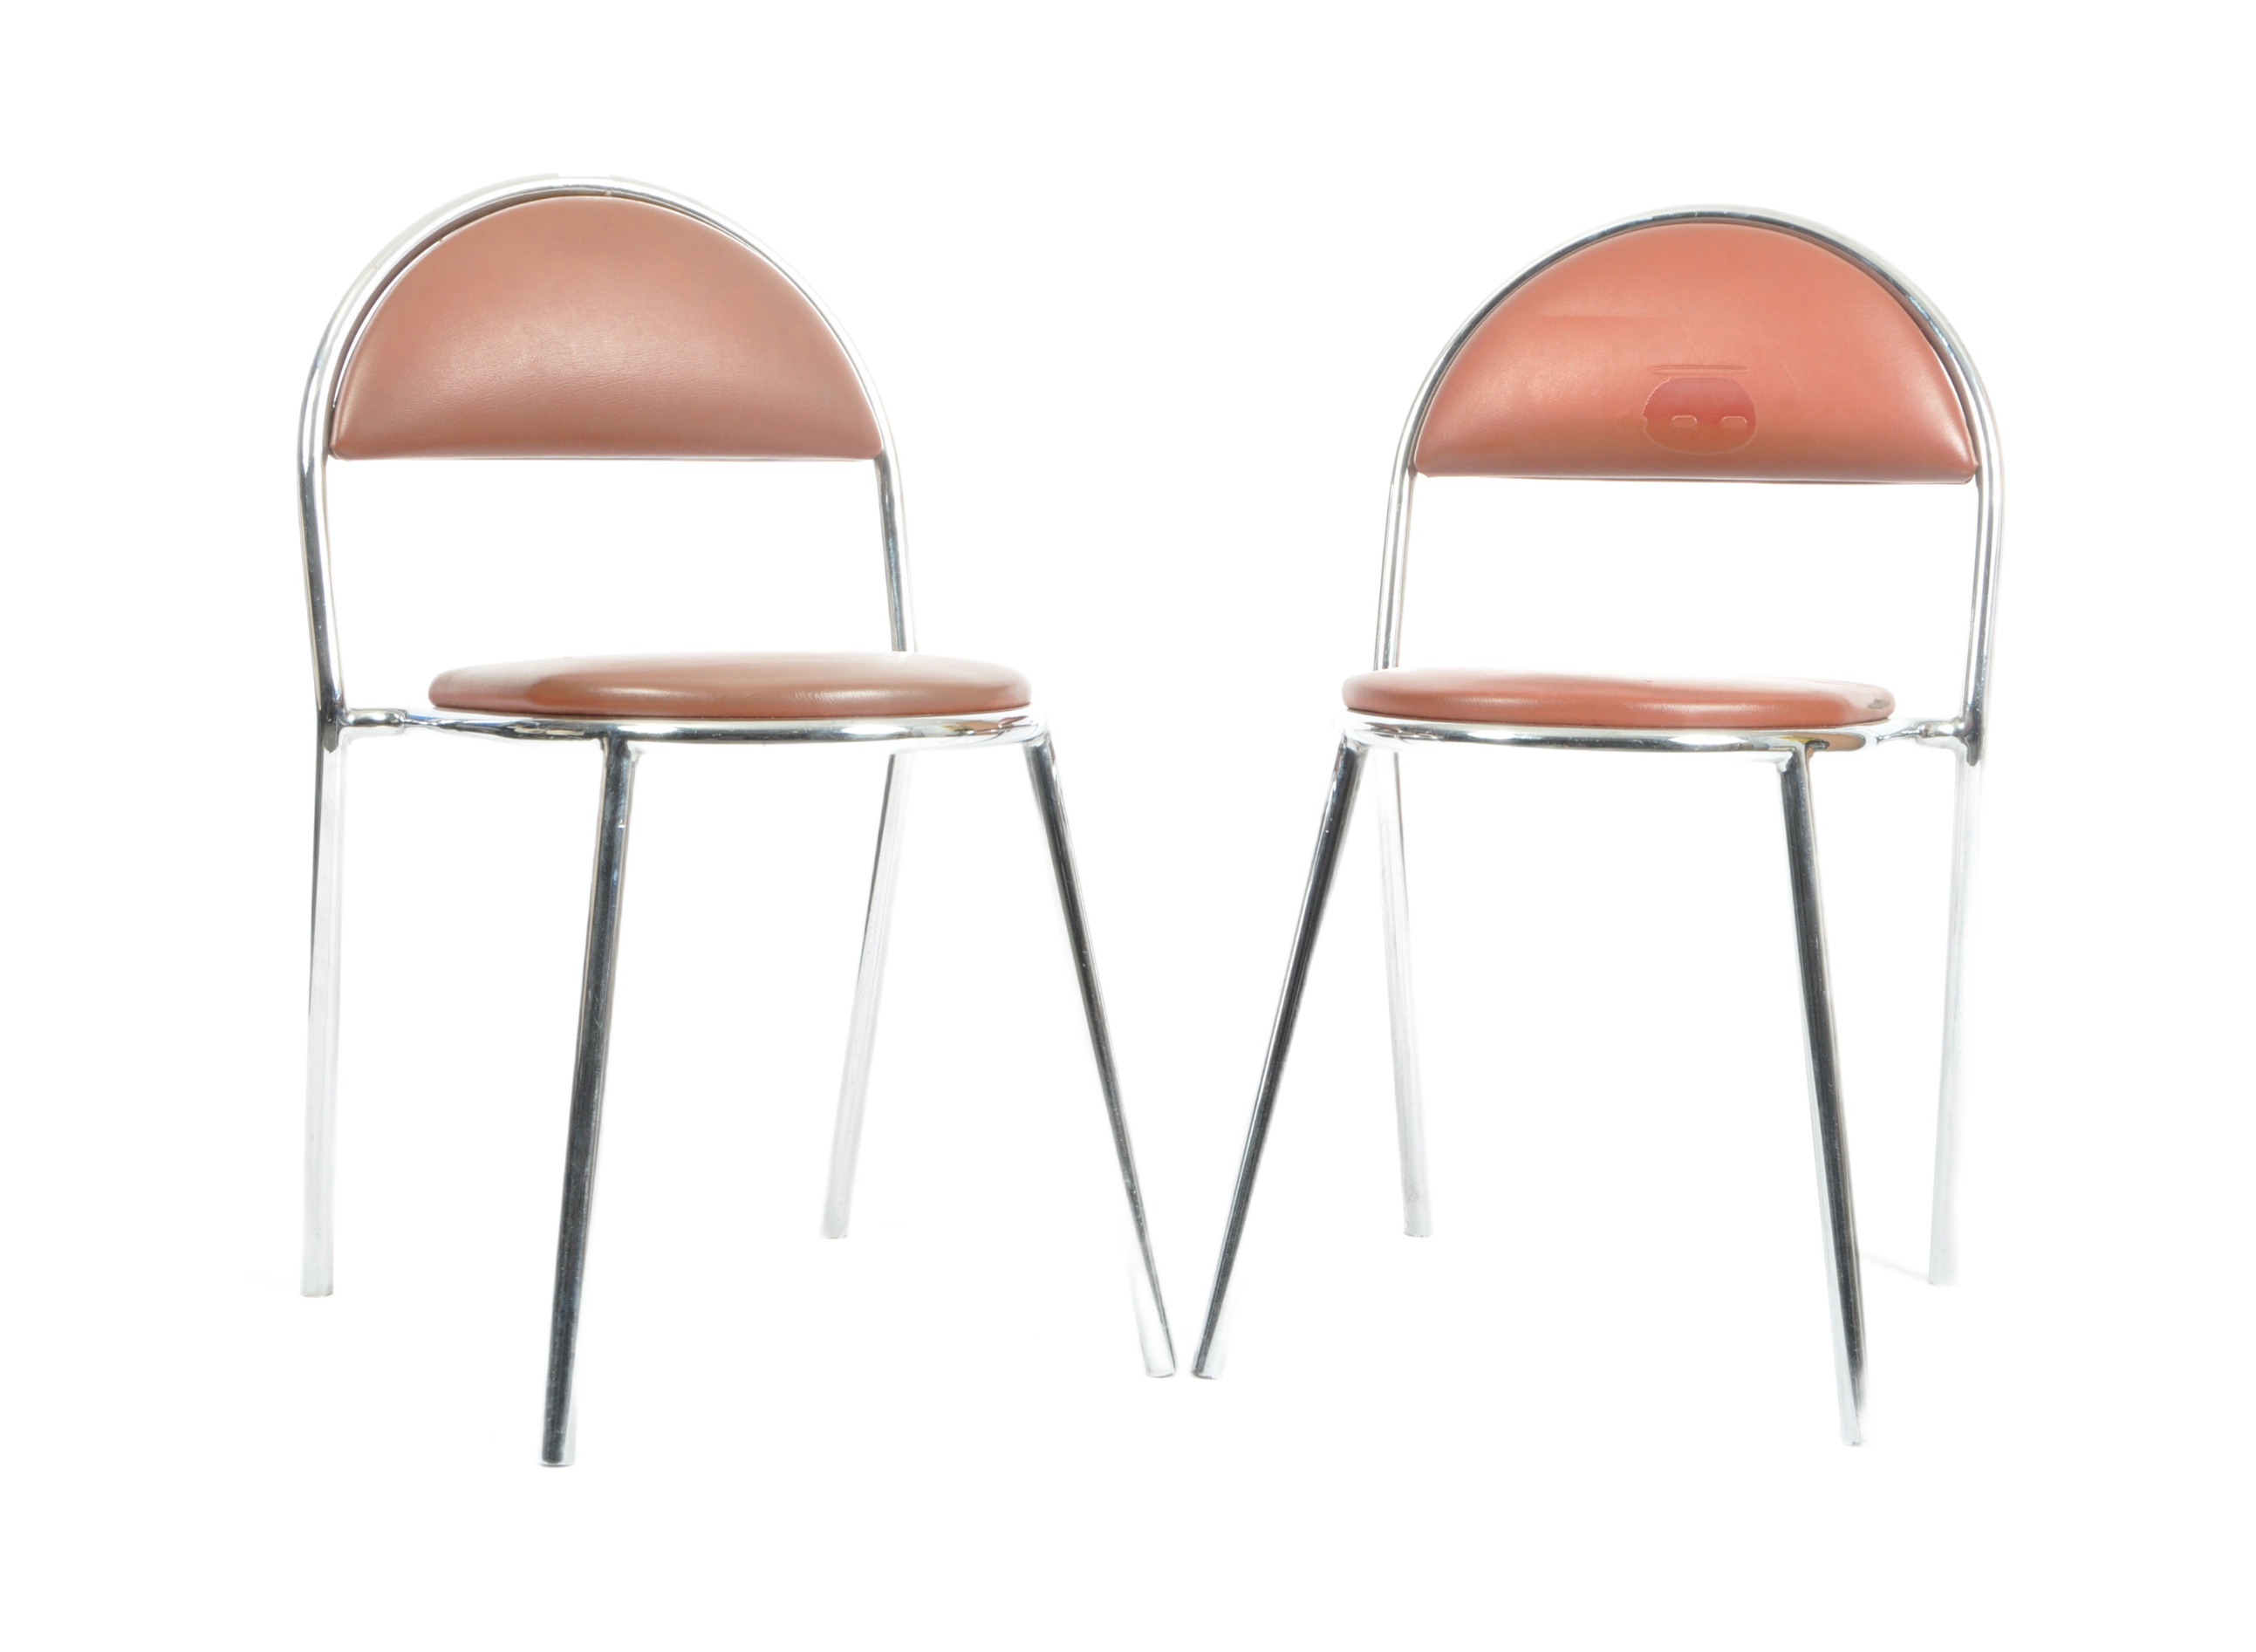 ZOEFTIG - MATCHING PAIR OF VINTAGE CHROME AIRPORT CHAIRS